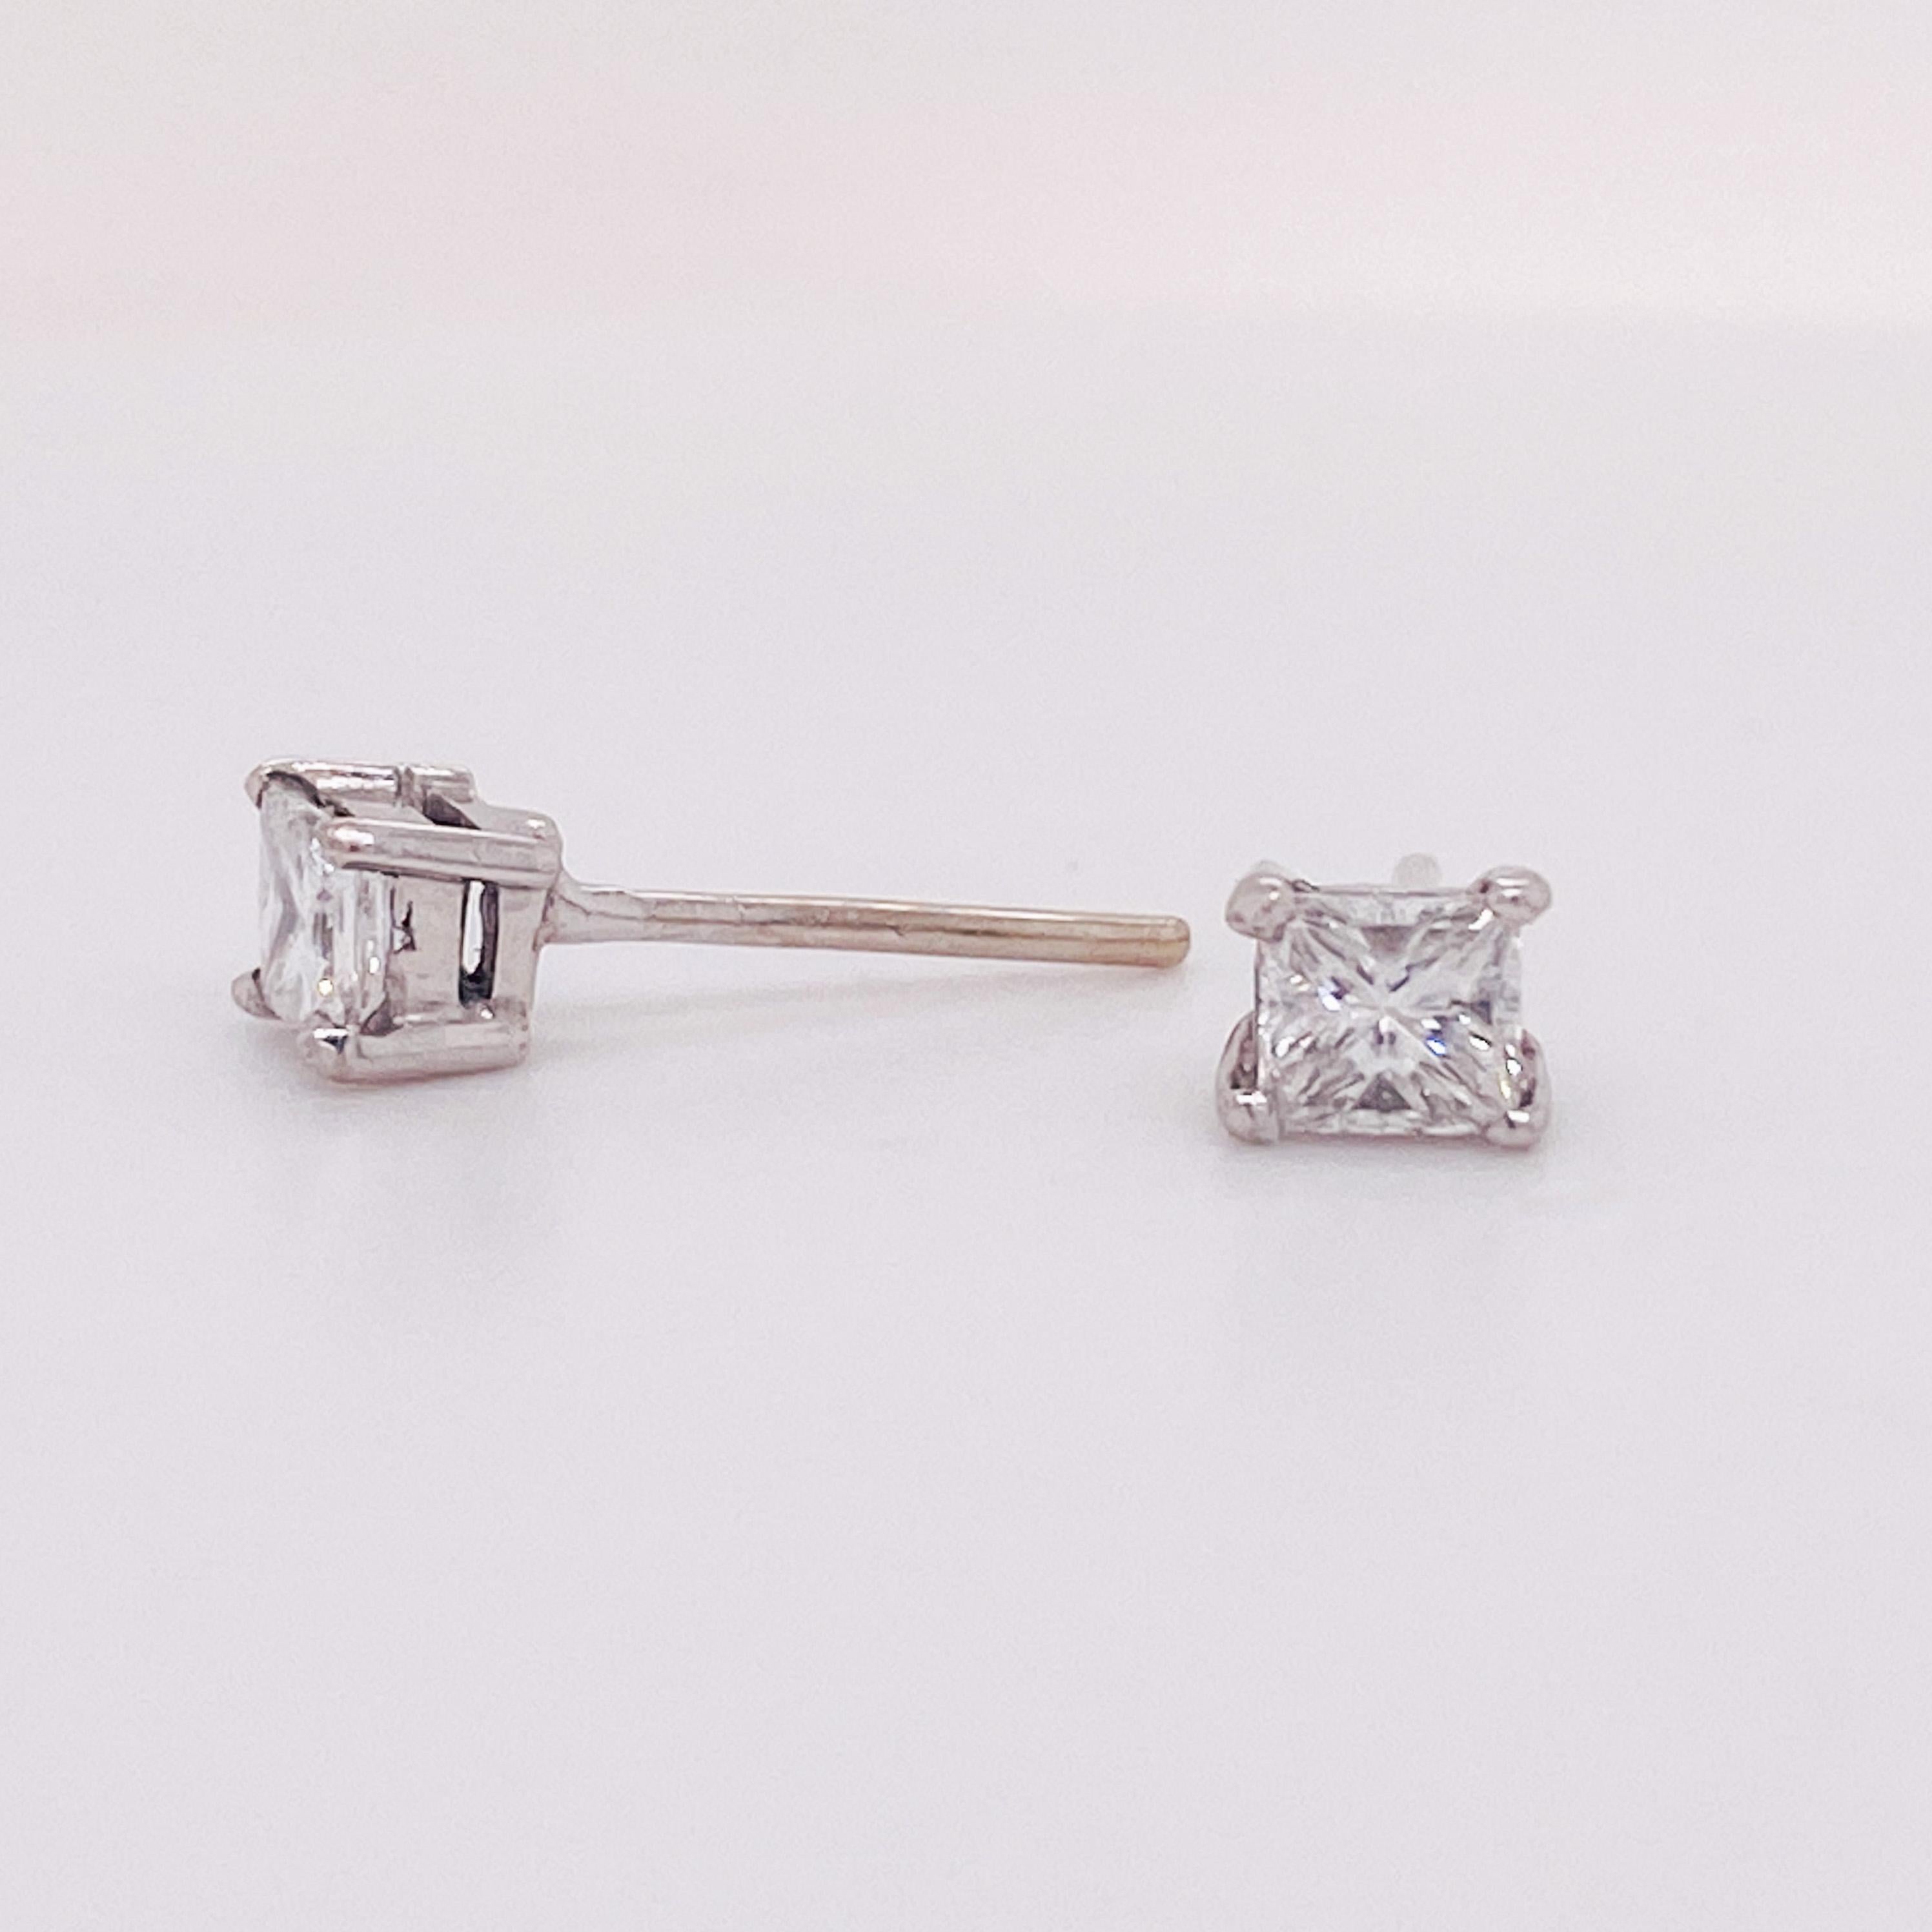 These princess cut diamond studs will look perfect in any ear! Wear your studs by themselves or as an accent next to larger earrings! The total weight of these diamonds is 0.80 carats (or slightly more) with near-colorless G-H color and VVS-VS